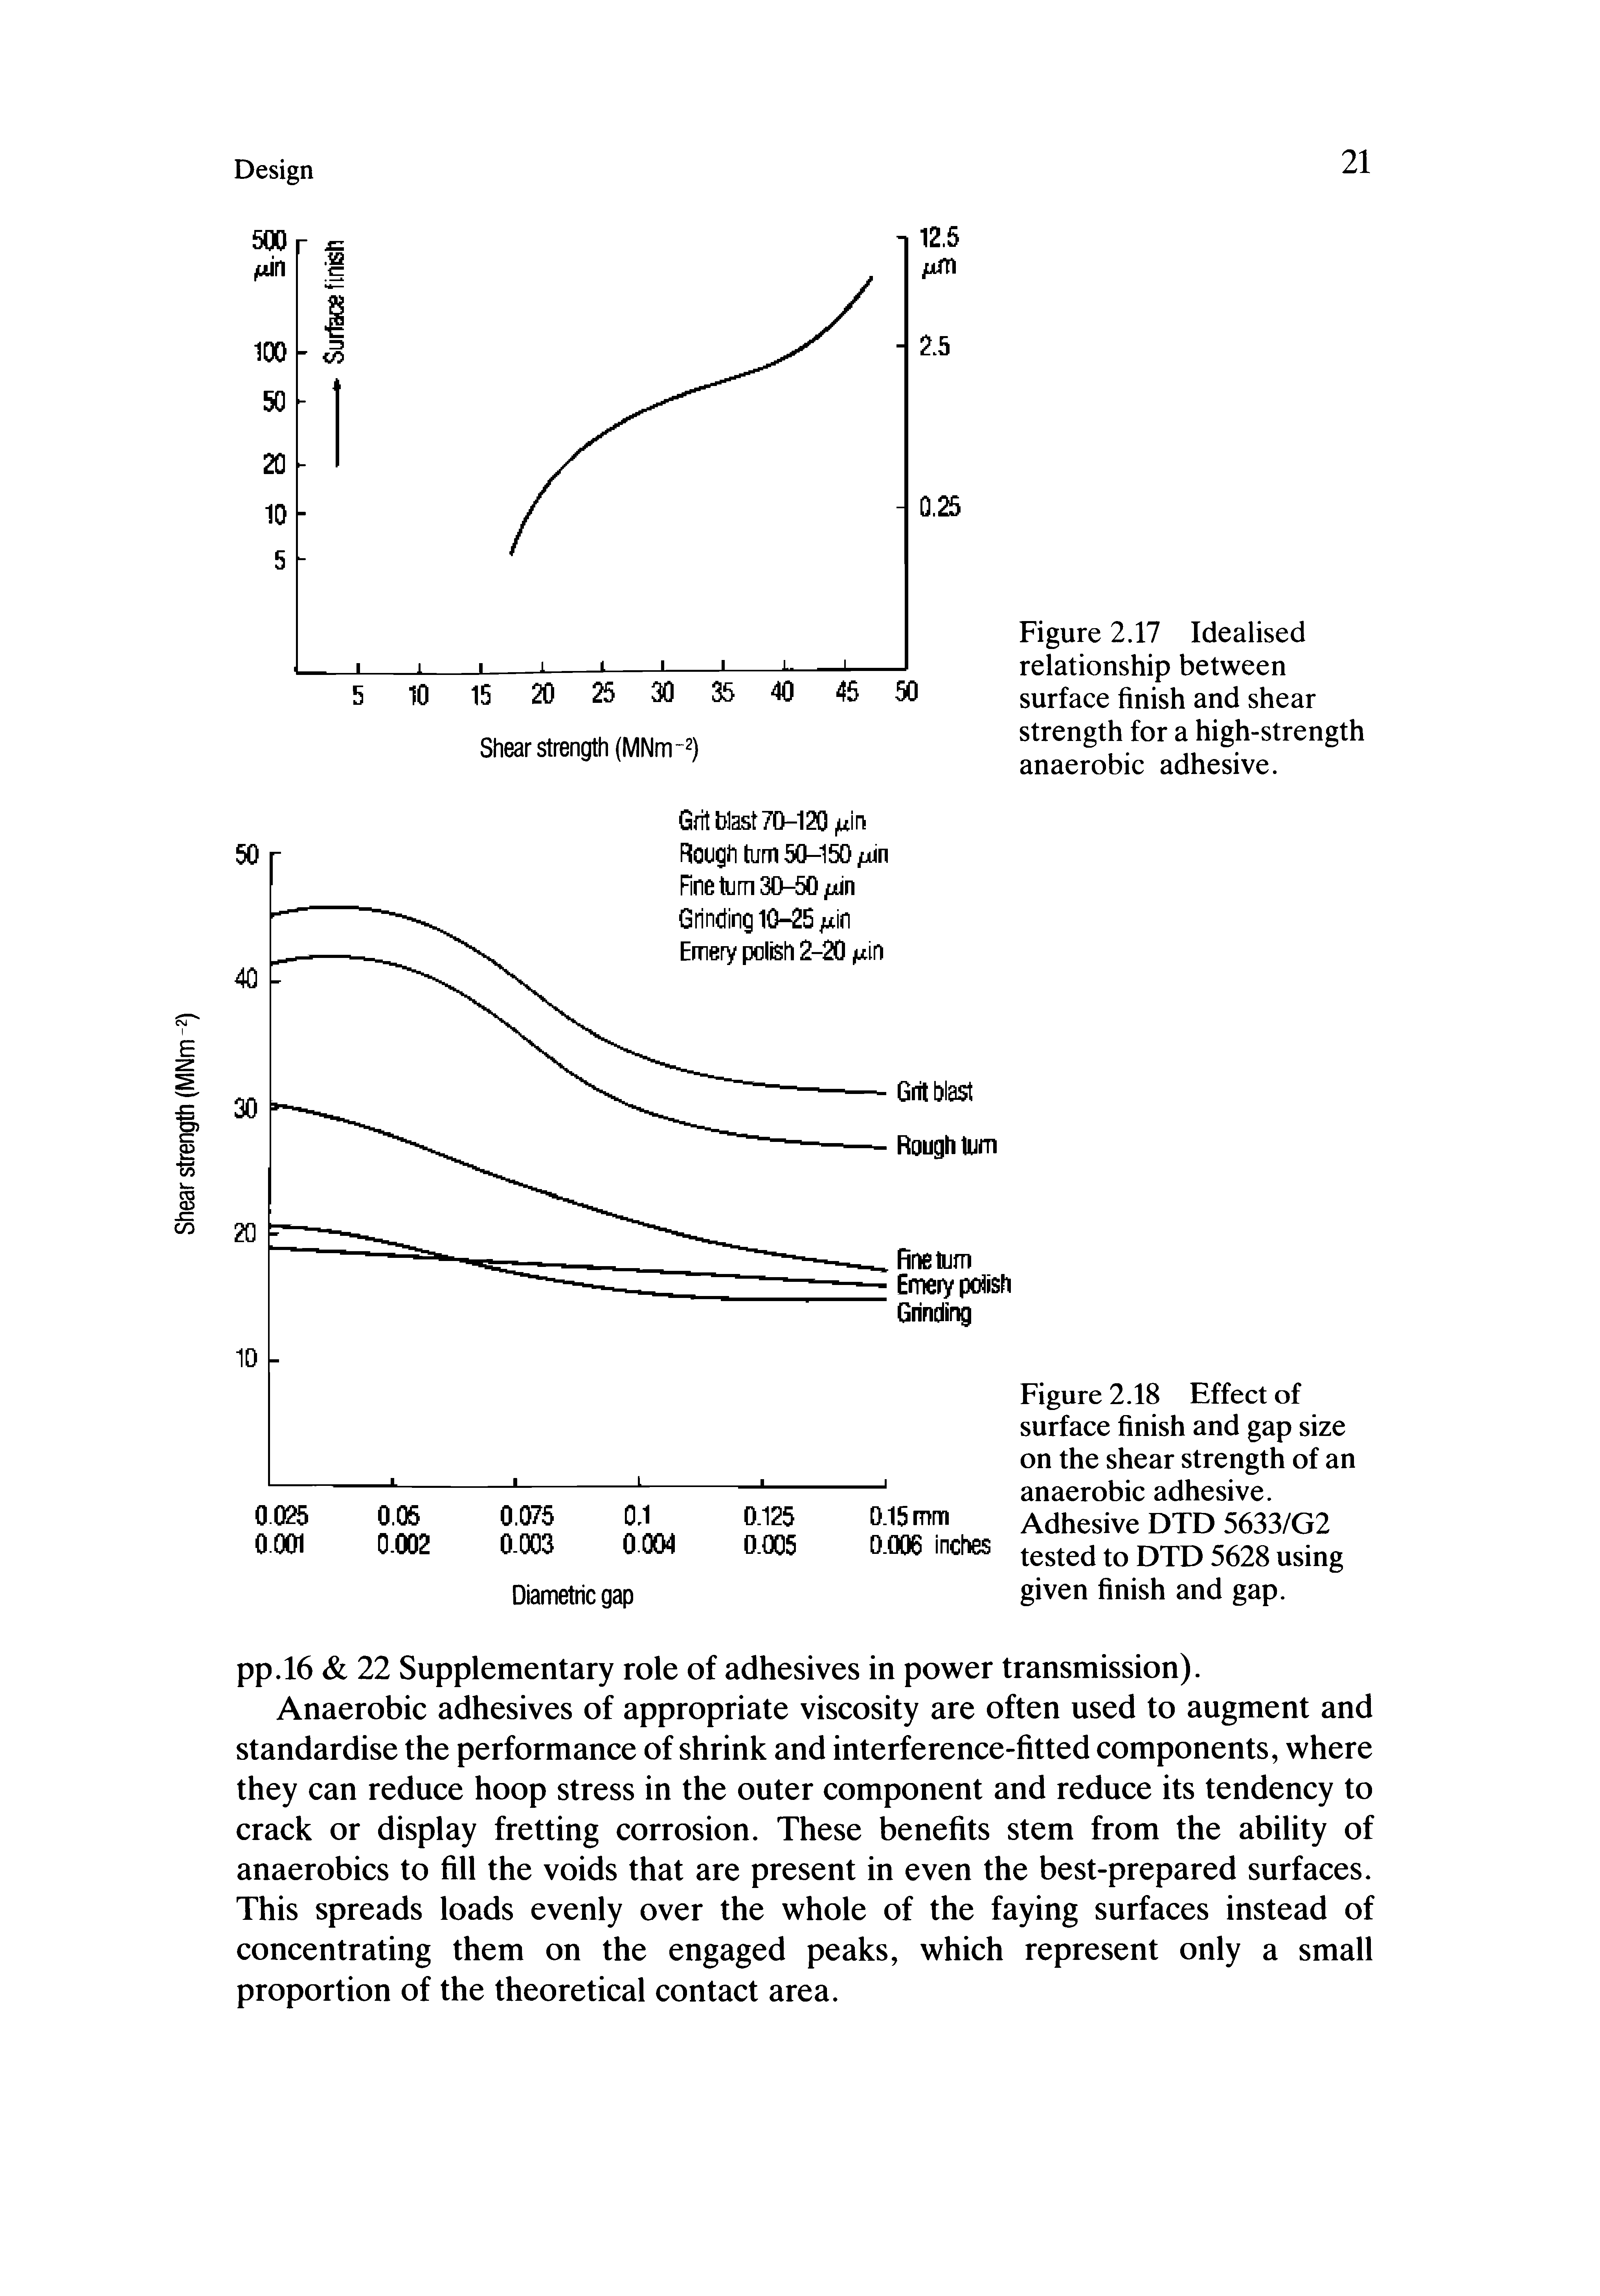 Figure 2.18 Effect of surface finish and gap size on the shear strength of an anaerobic adhesive. Adhesive DTD 5633/G2 tested to DTD 5628 using given finish and gap.